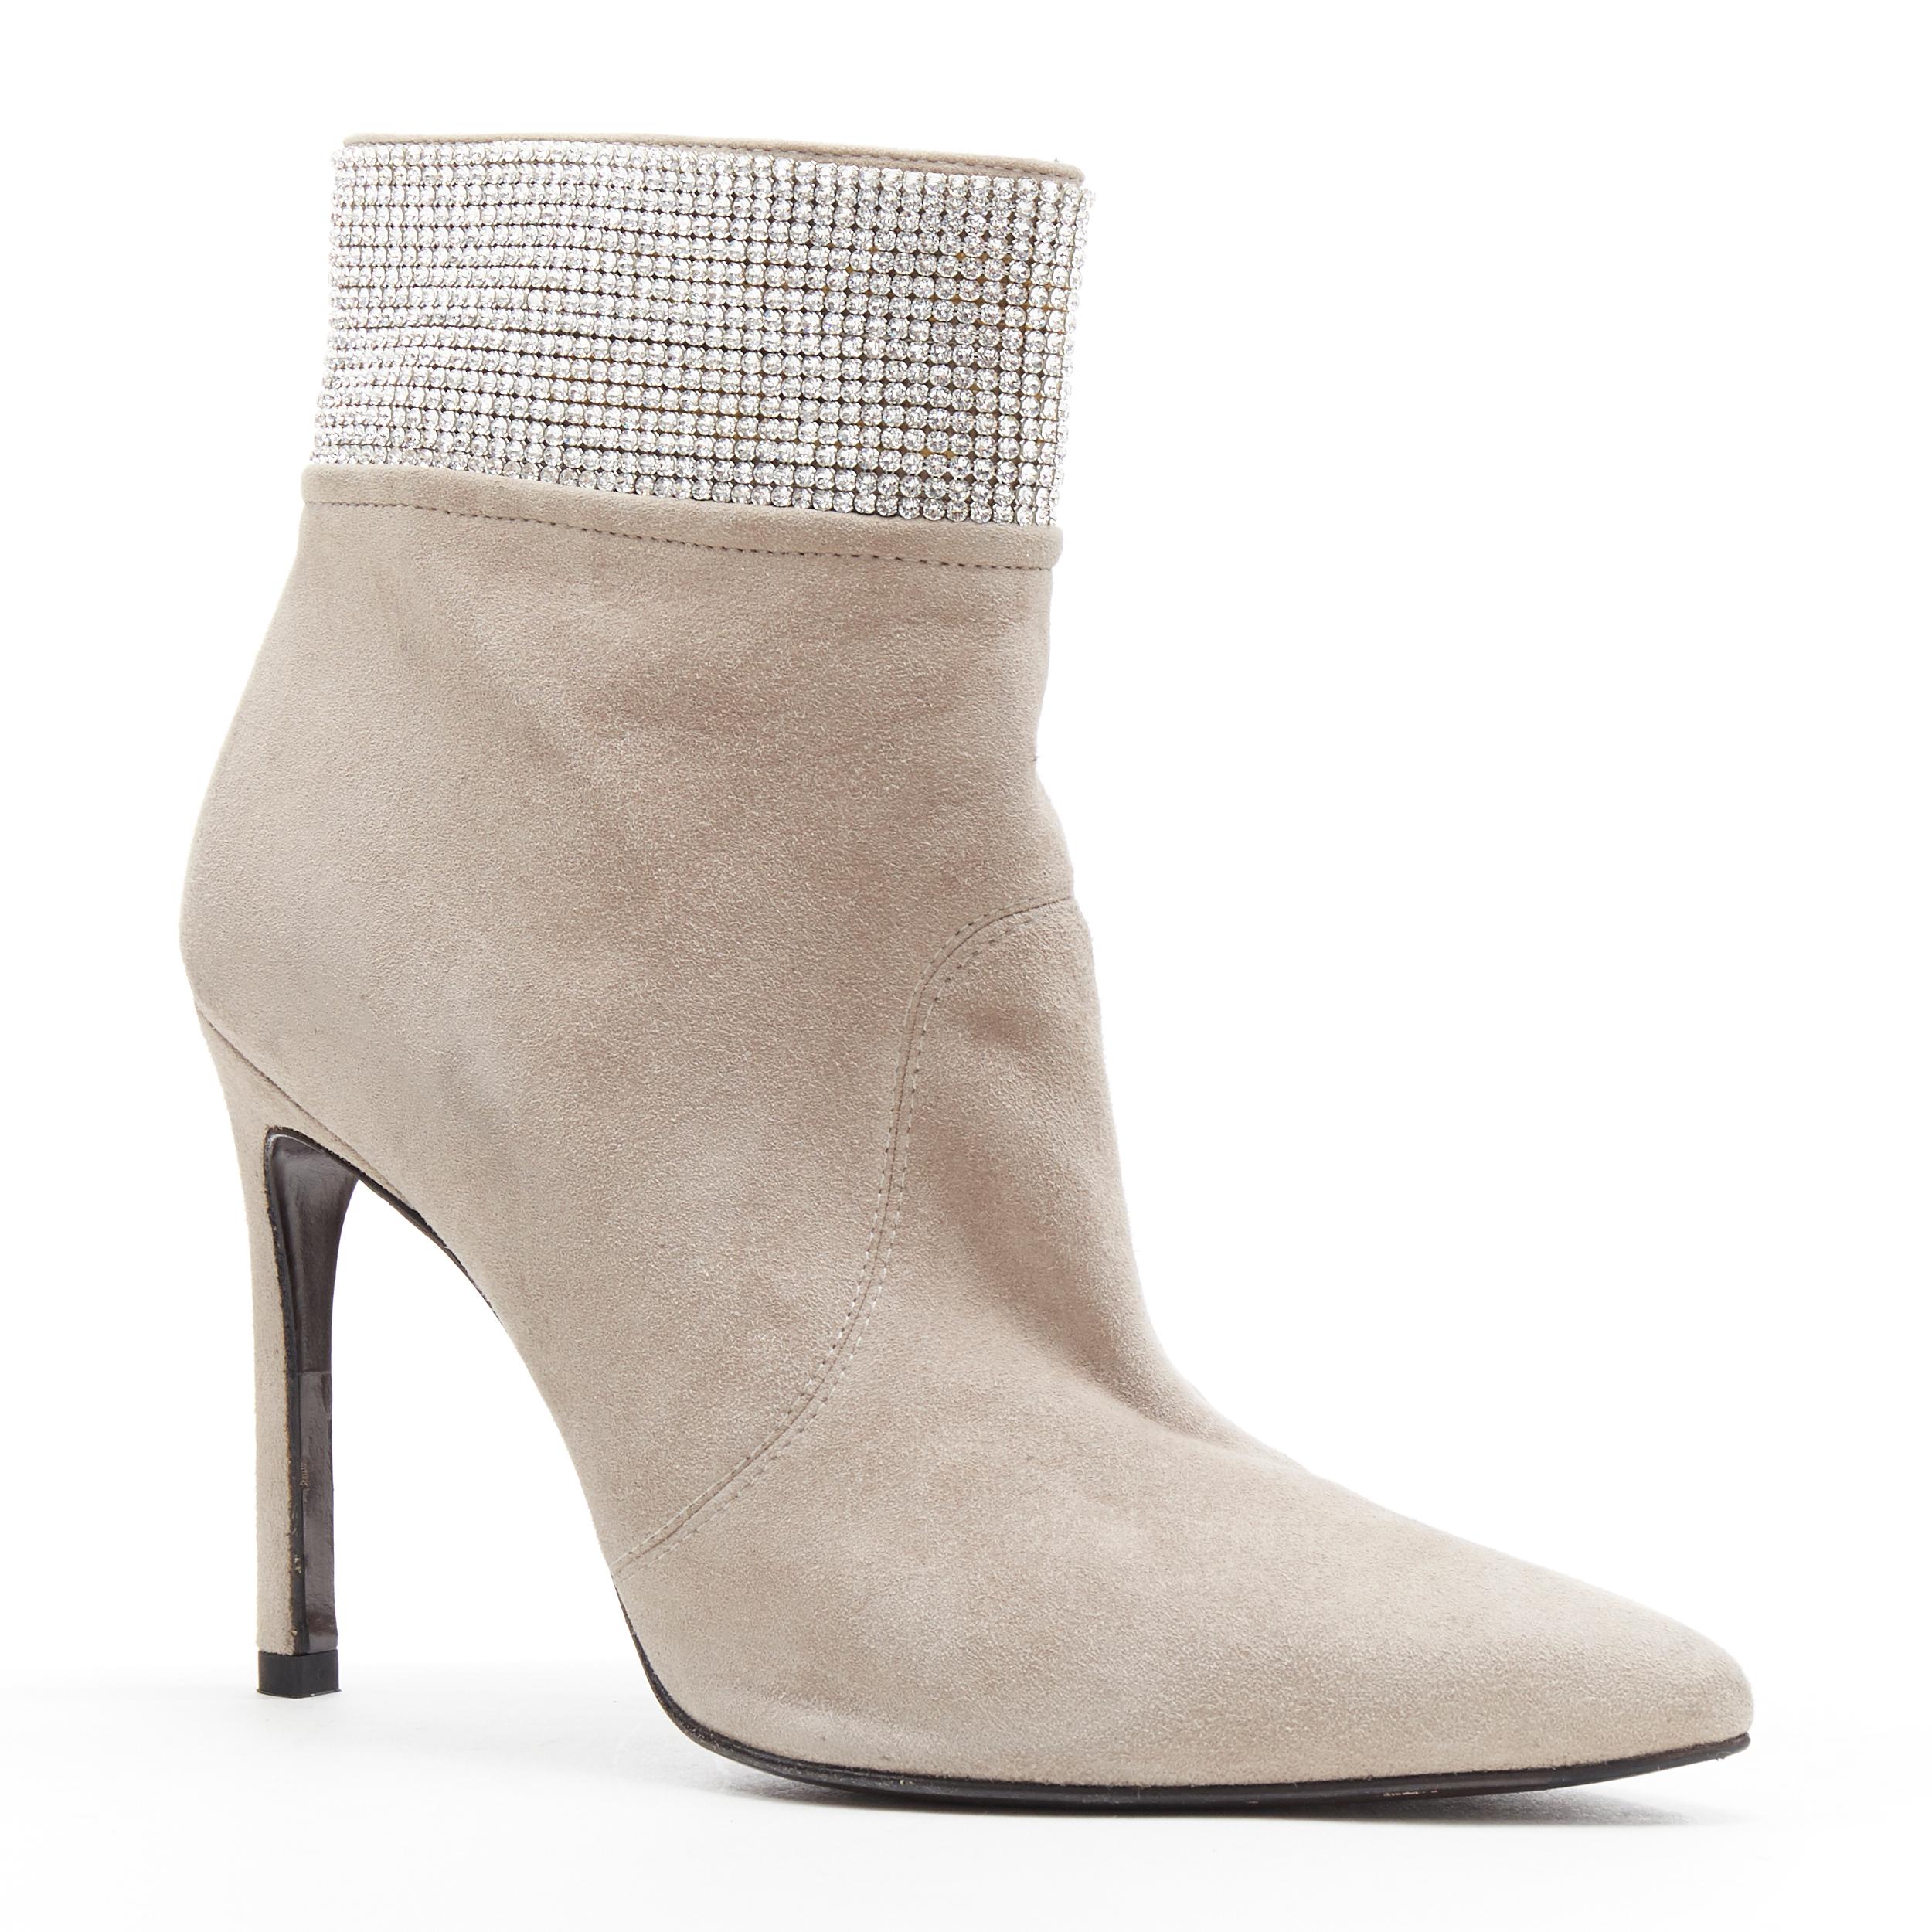 STUART WEITZMAN Highbeams grey fossil suede crystal embellished bootie EU38.5 
Reference: JEYN/A00002 
Brand: Stuart Weitzman 
Designer: Stuart Weitzman 
Material: Suede 
Color: Grey 
Pattern: Solid 
Closure: Zip 
Made in: Italy 


CONDITION: